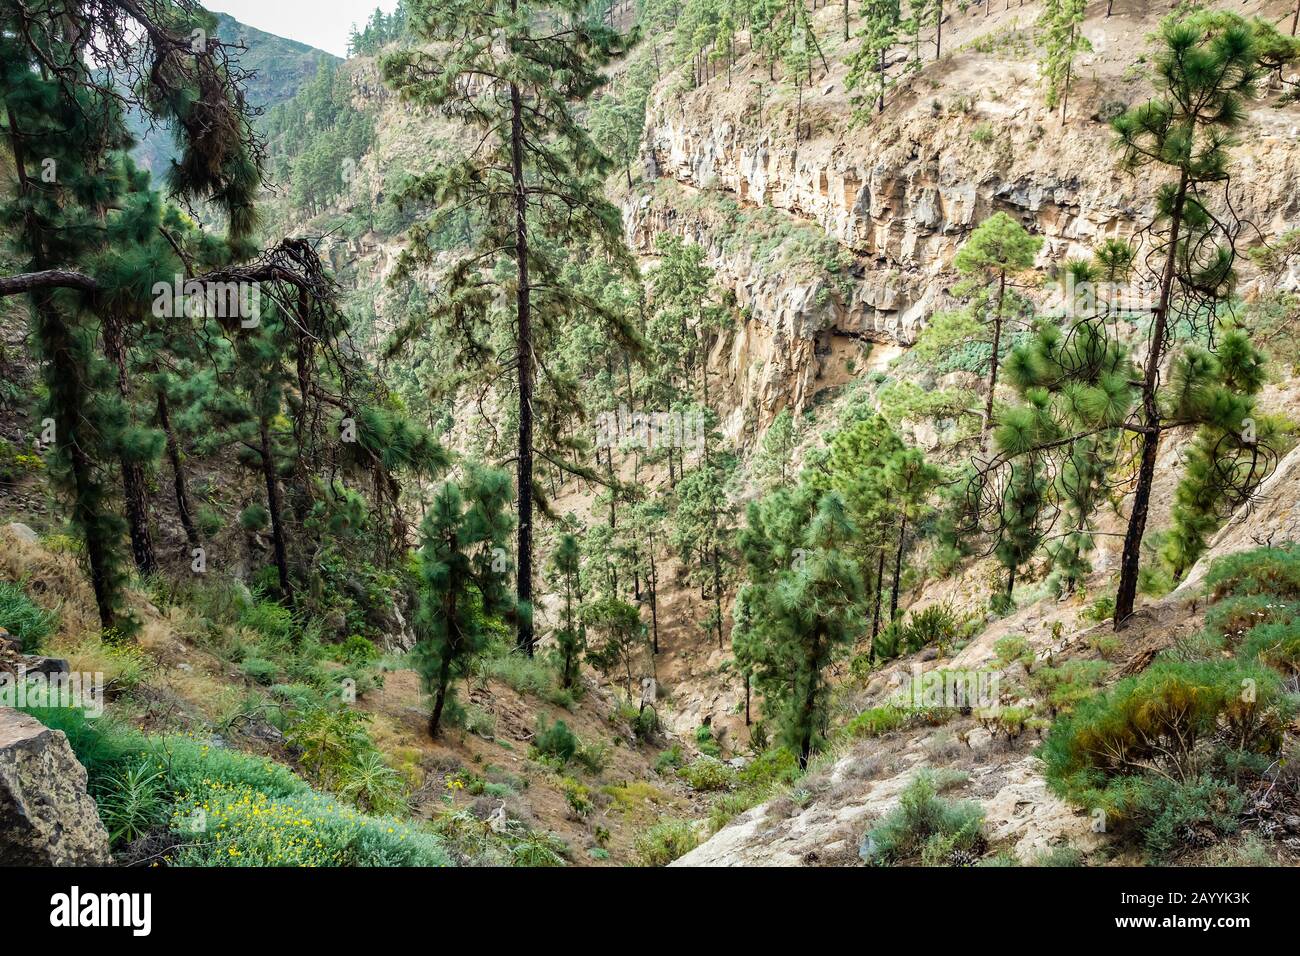 Stony path at upland surrounded by pine trees at sunny day. The slopes of a narrow deep gorge covered with centuries-old pines. Rocky tracking road in Stock Photo